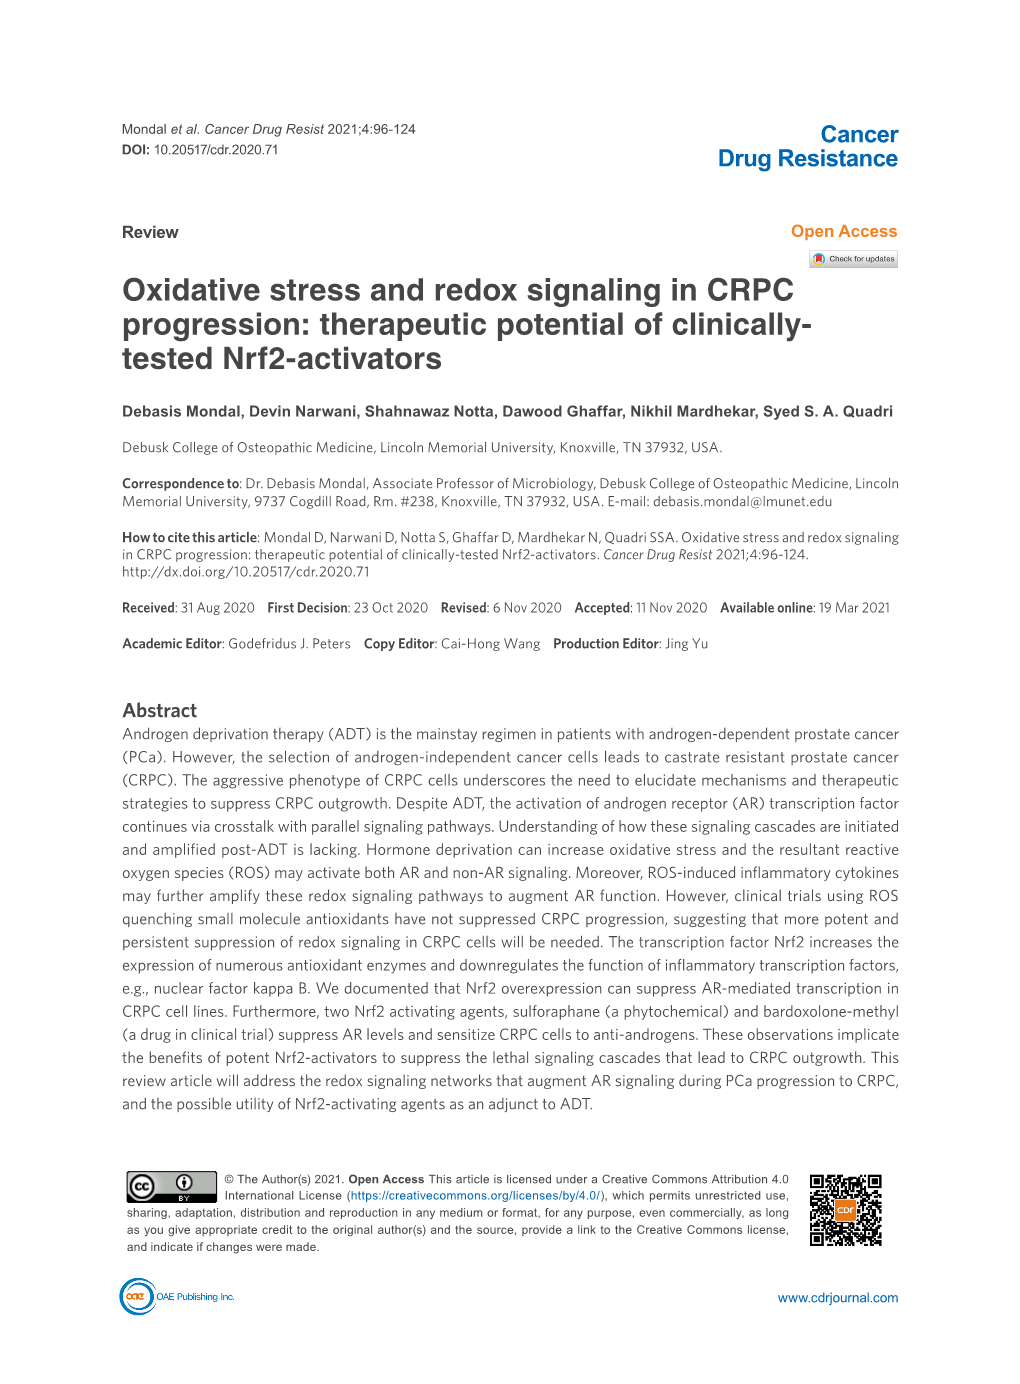 Oxidative Stress and Redox Signaling in CRPC Progression: Therapeutic Potential of Clinically- Tested Nrf2-Activators